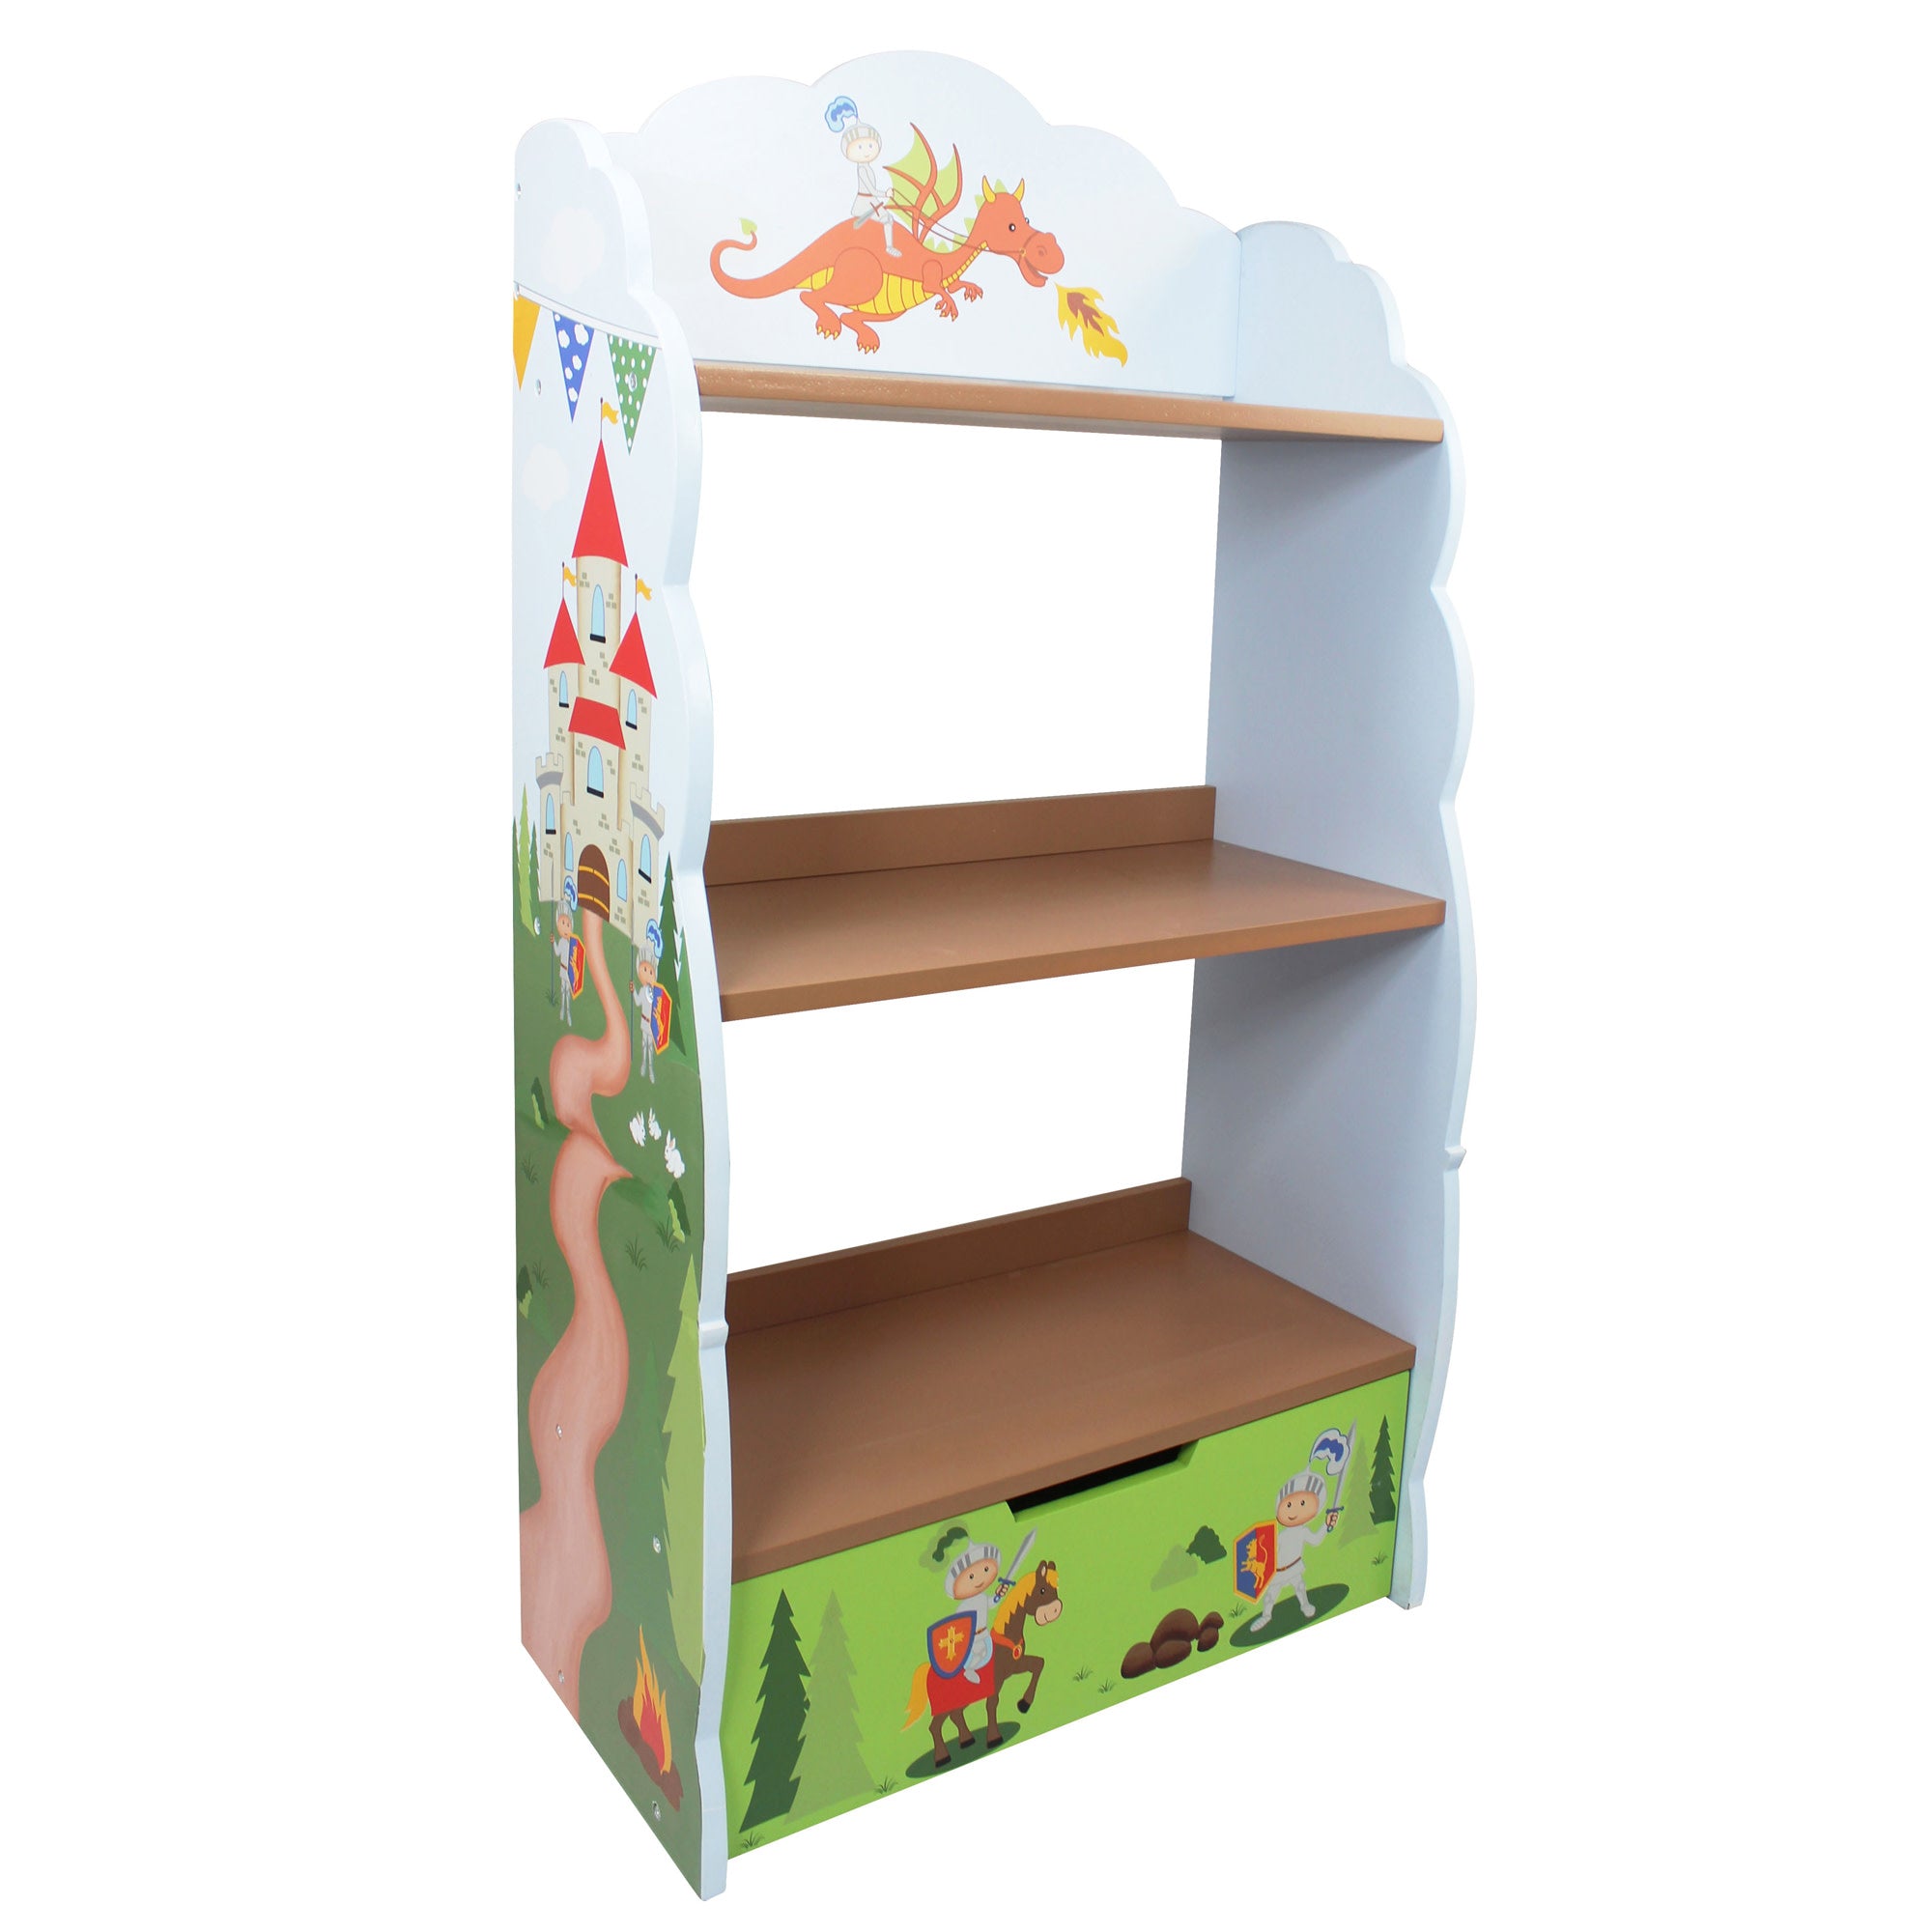 FANTASY FIELDS KNIGHTS AND DRAGONS BOOKSHELF, MULTICOLOR